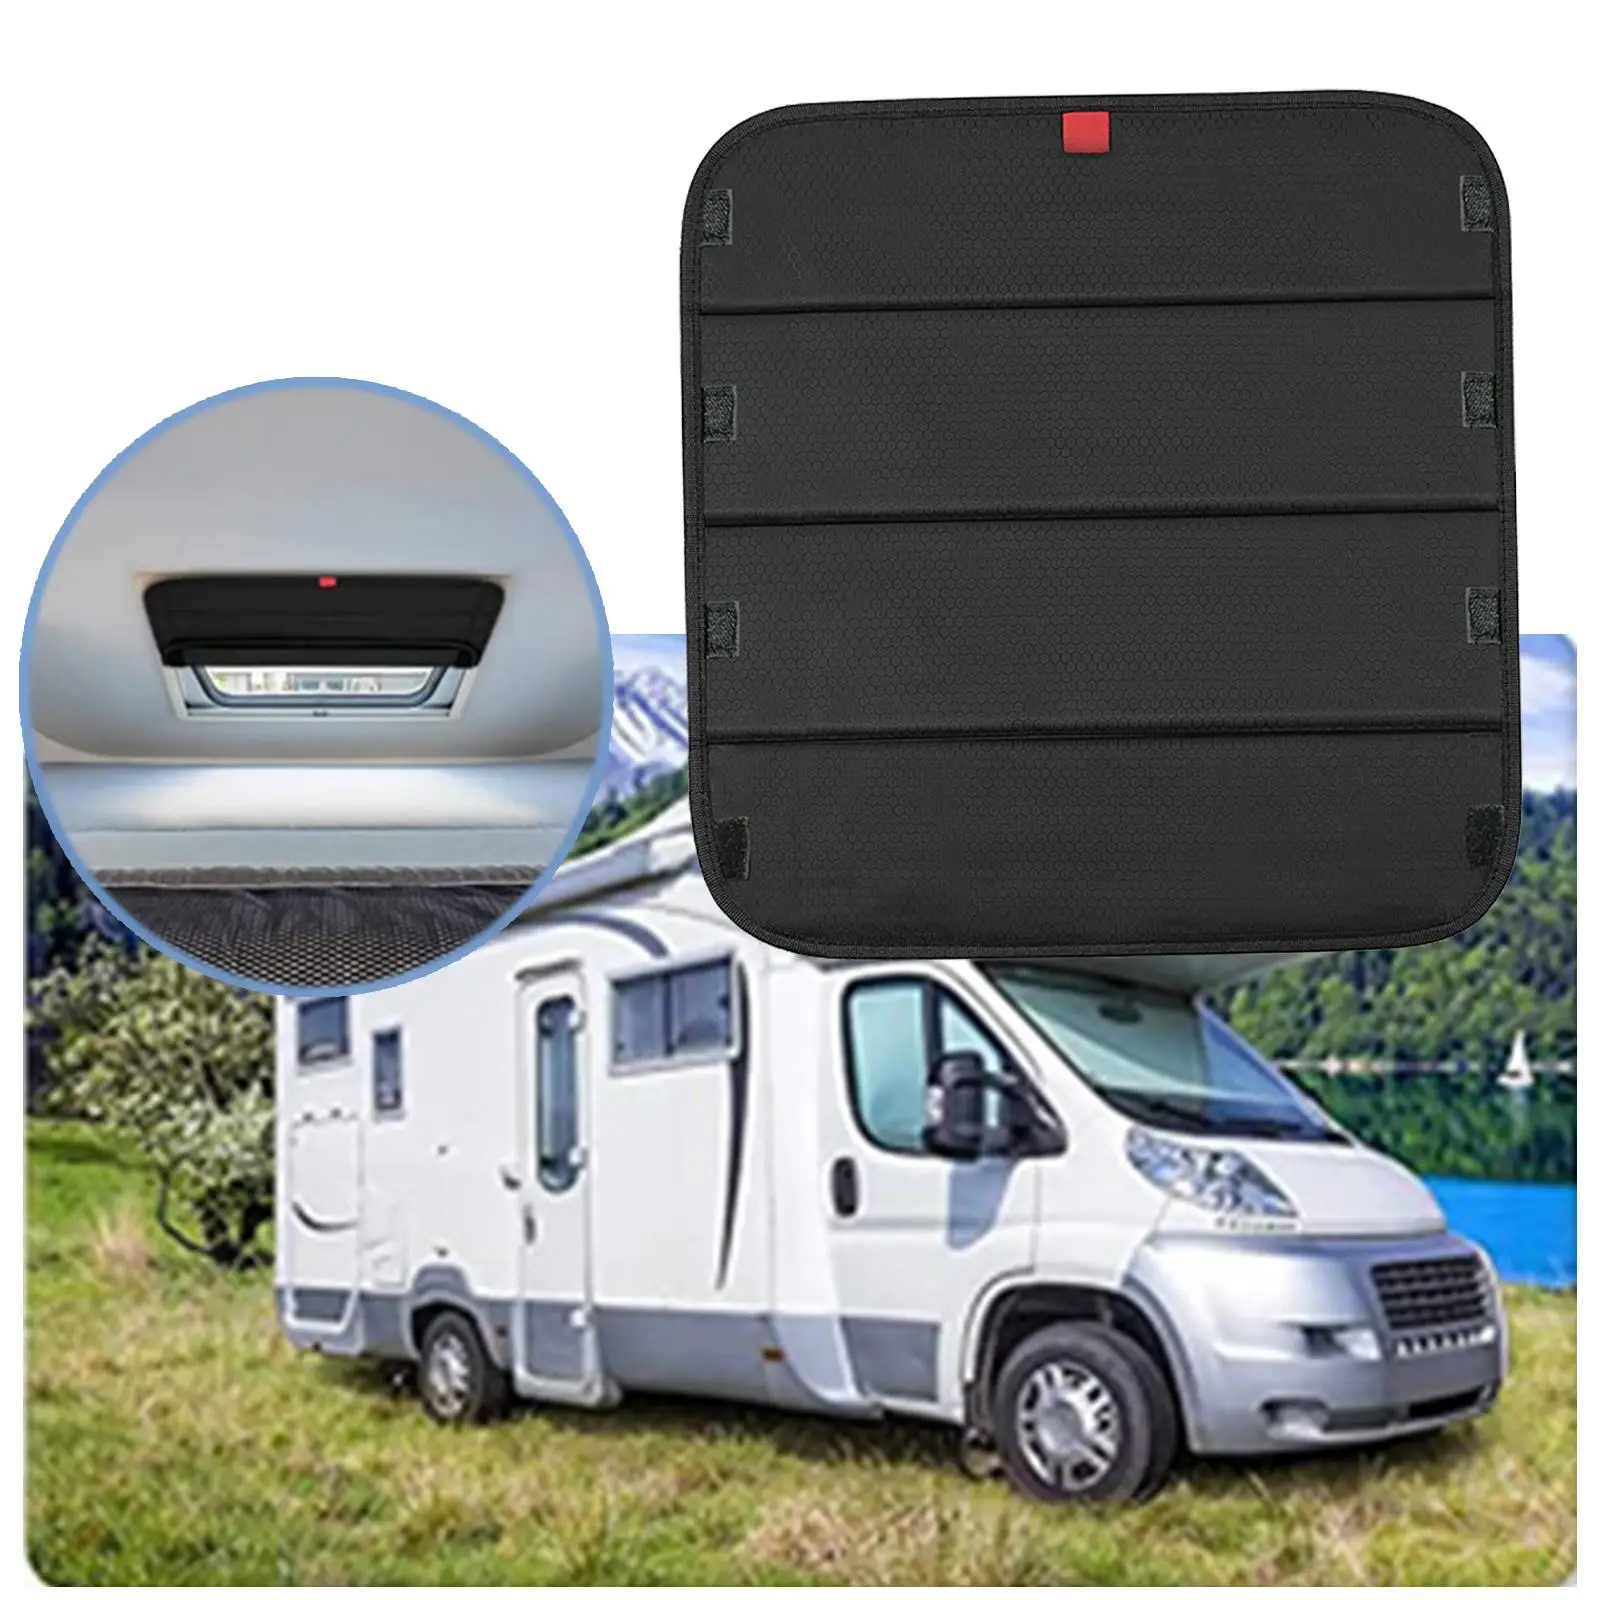 RV Skylight Blackout Cover RV Window Shade RV Roof Vent Cover for Sunroof Camping Camper Marine Applications Travel Trailer